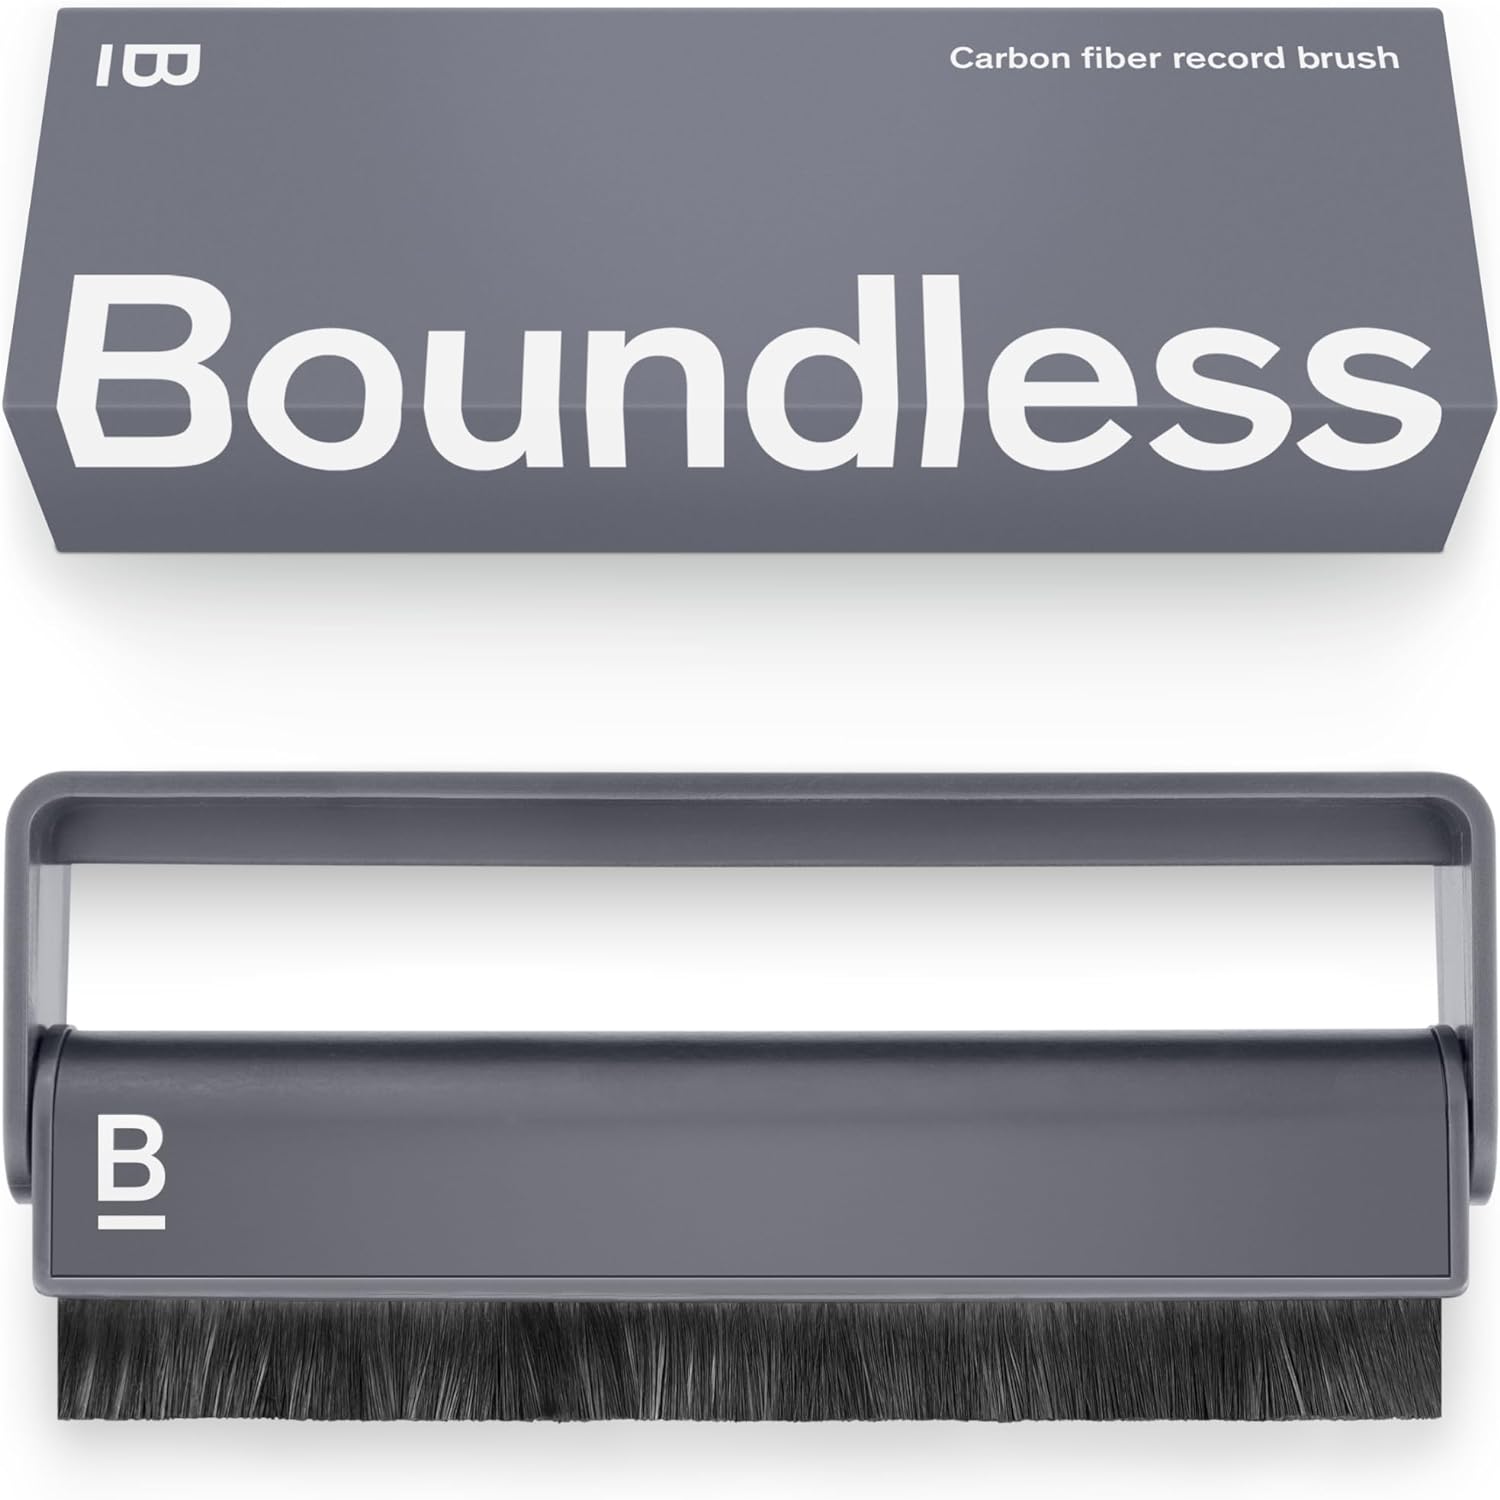 An image of a Boundless anti-static record brush for a post about the best accessories for a record player